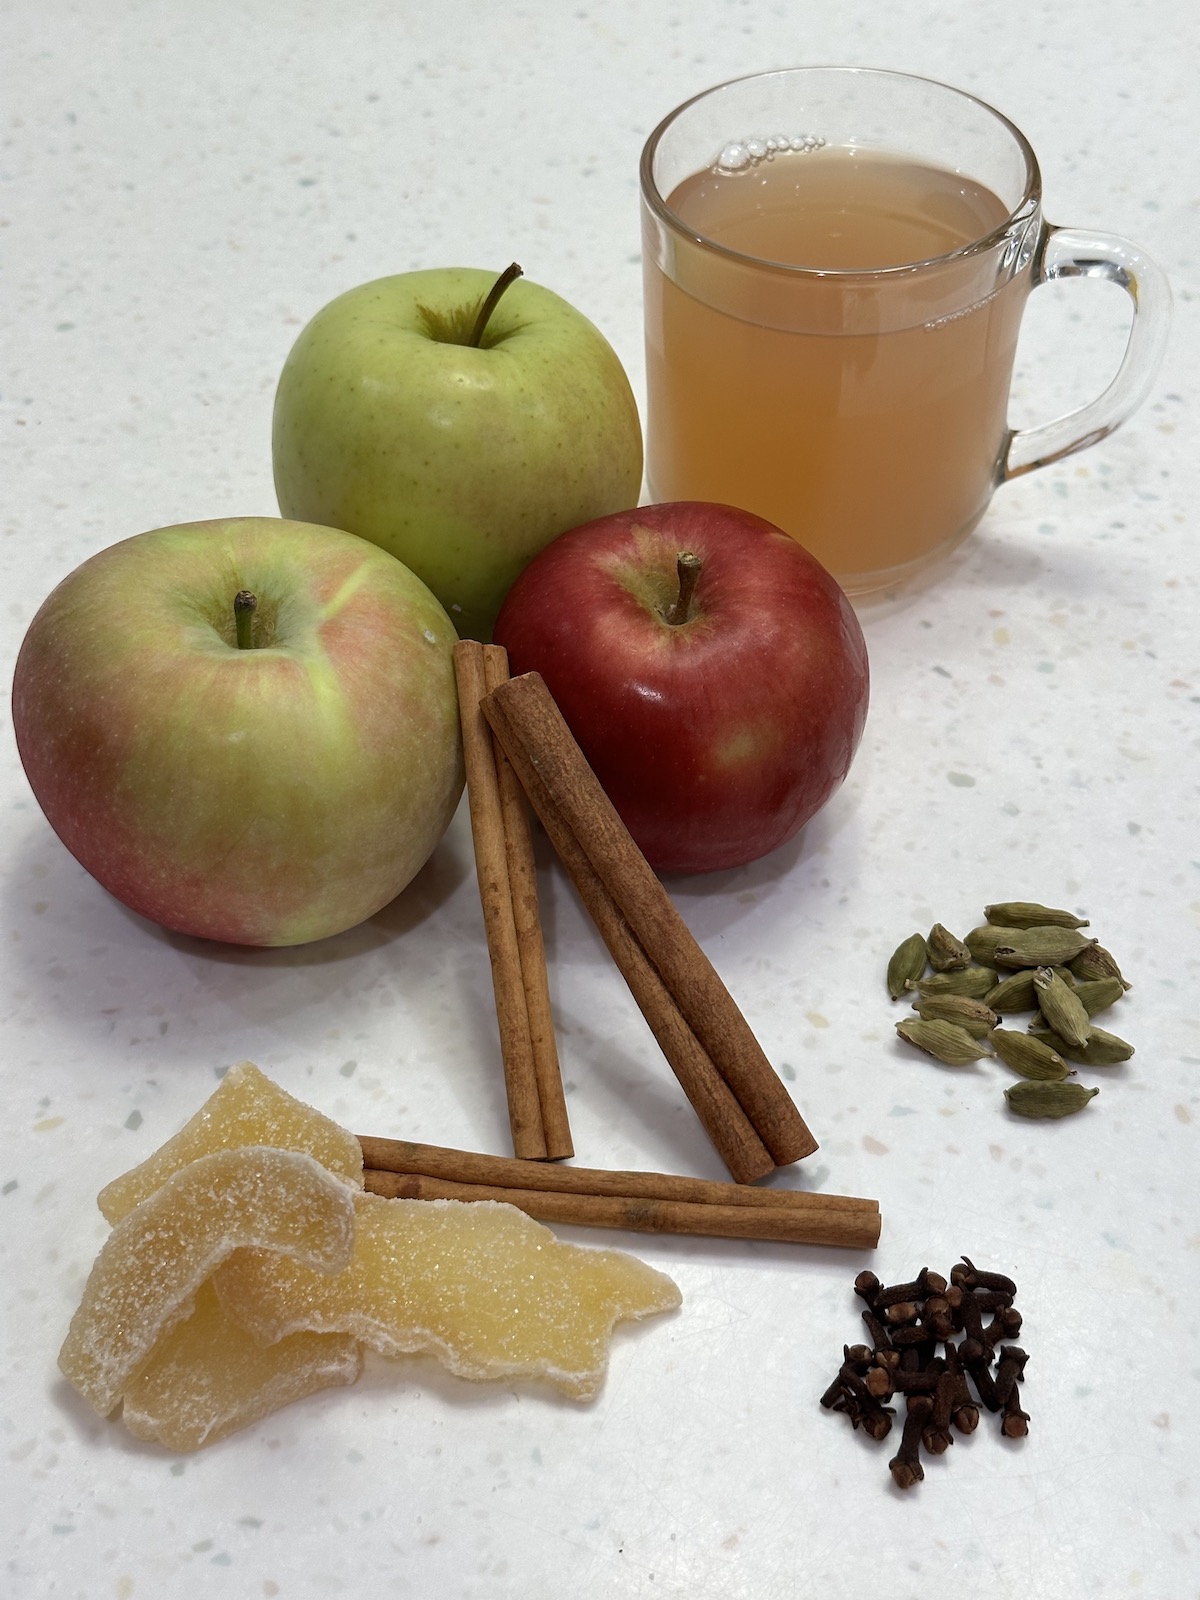 apples, cinnamon sticks, crystoalized ginger, whole cloves, cardamom pods and a cup of apple tea in a clear mug